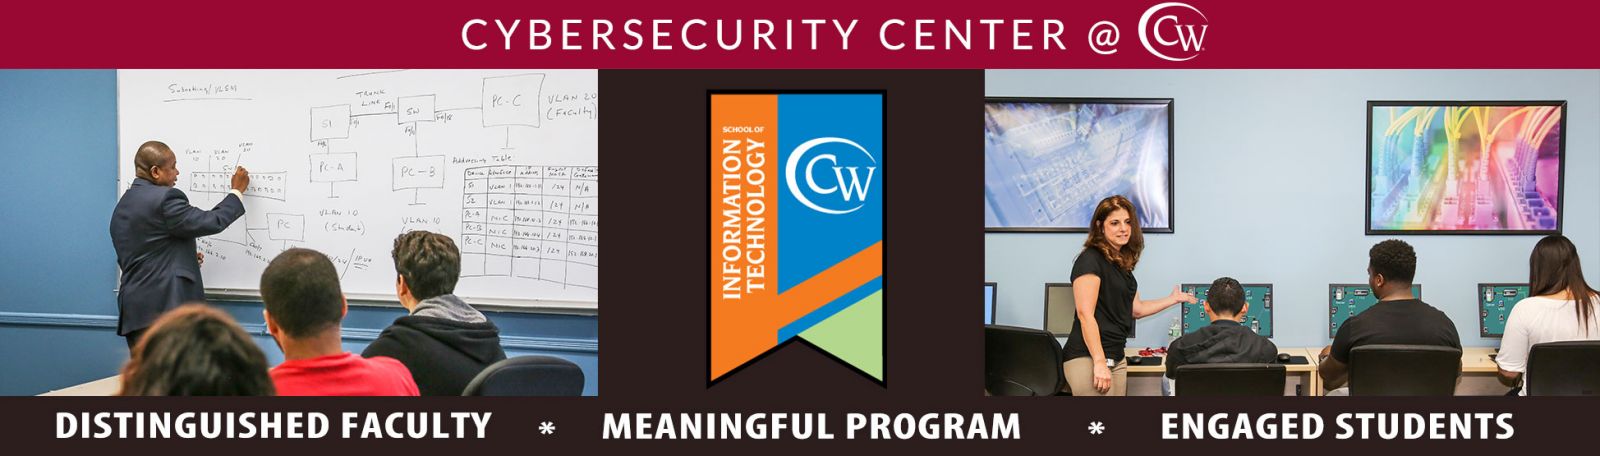 CW Cybersecurity Center